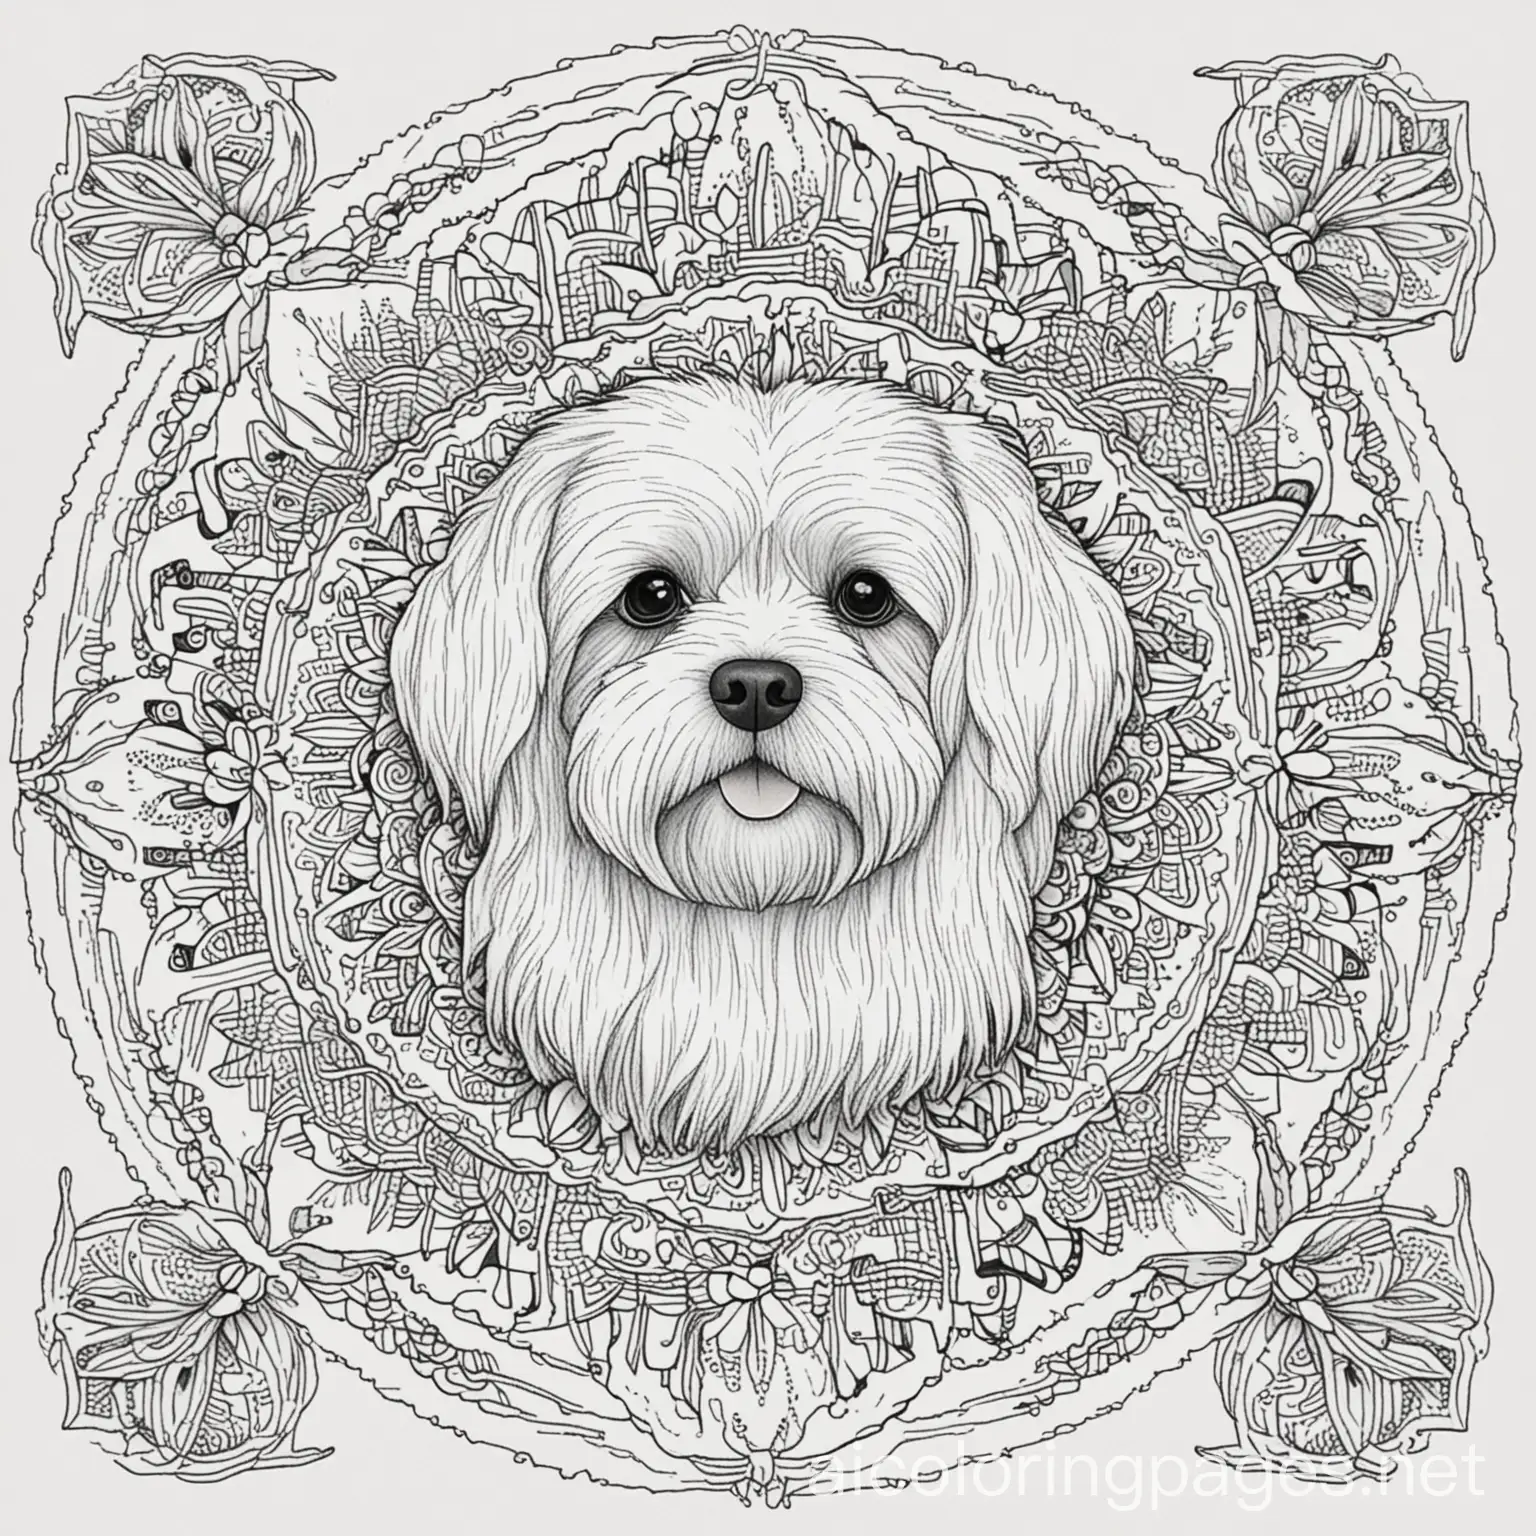 Havanese mandala coloring page
, Coloring Page, black and white, line art, white background, Simplicity, Ample White Space. The background of the coloring page is plain white to make it easy for young children to color within the lines. The outlines of all the subjects are easy to distinguish, making it simple for kids to color without too much difficulty